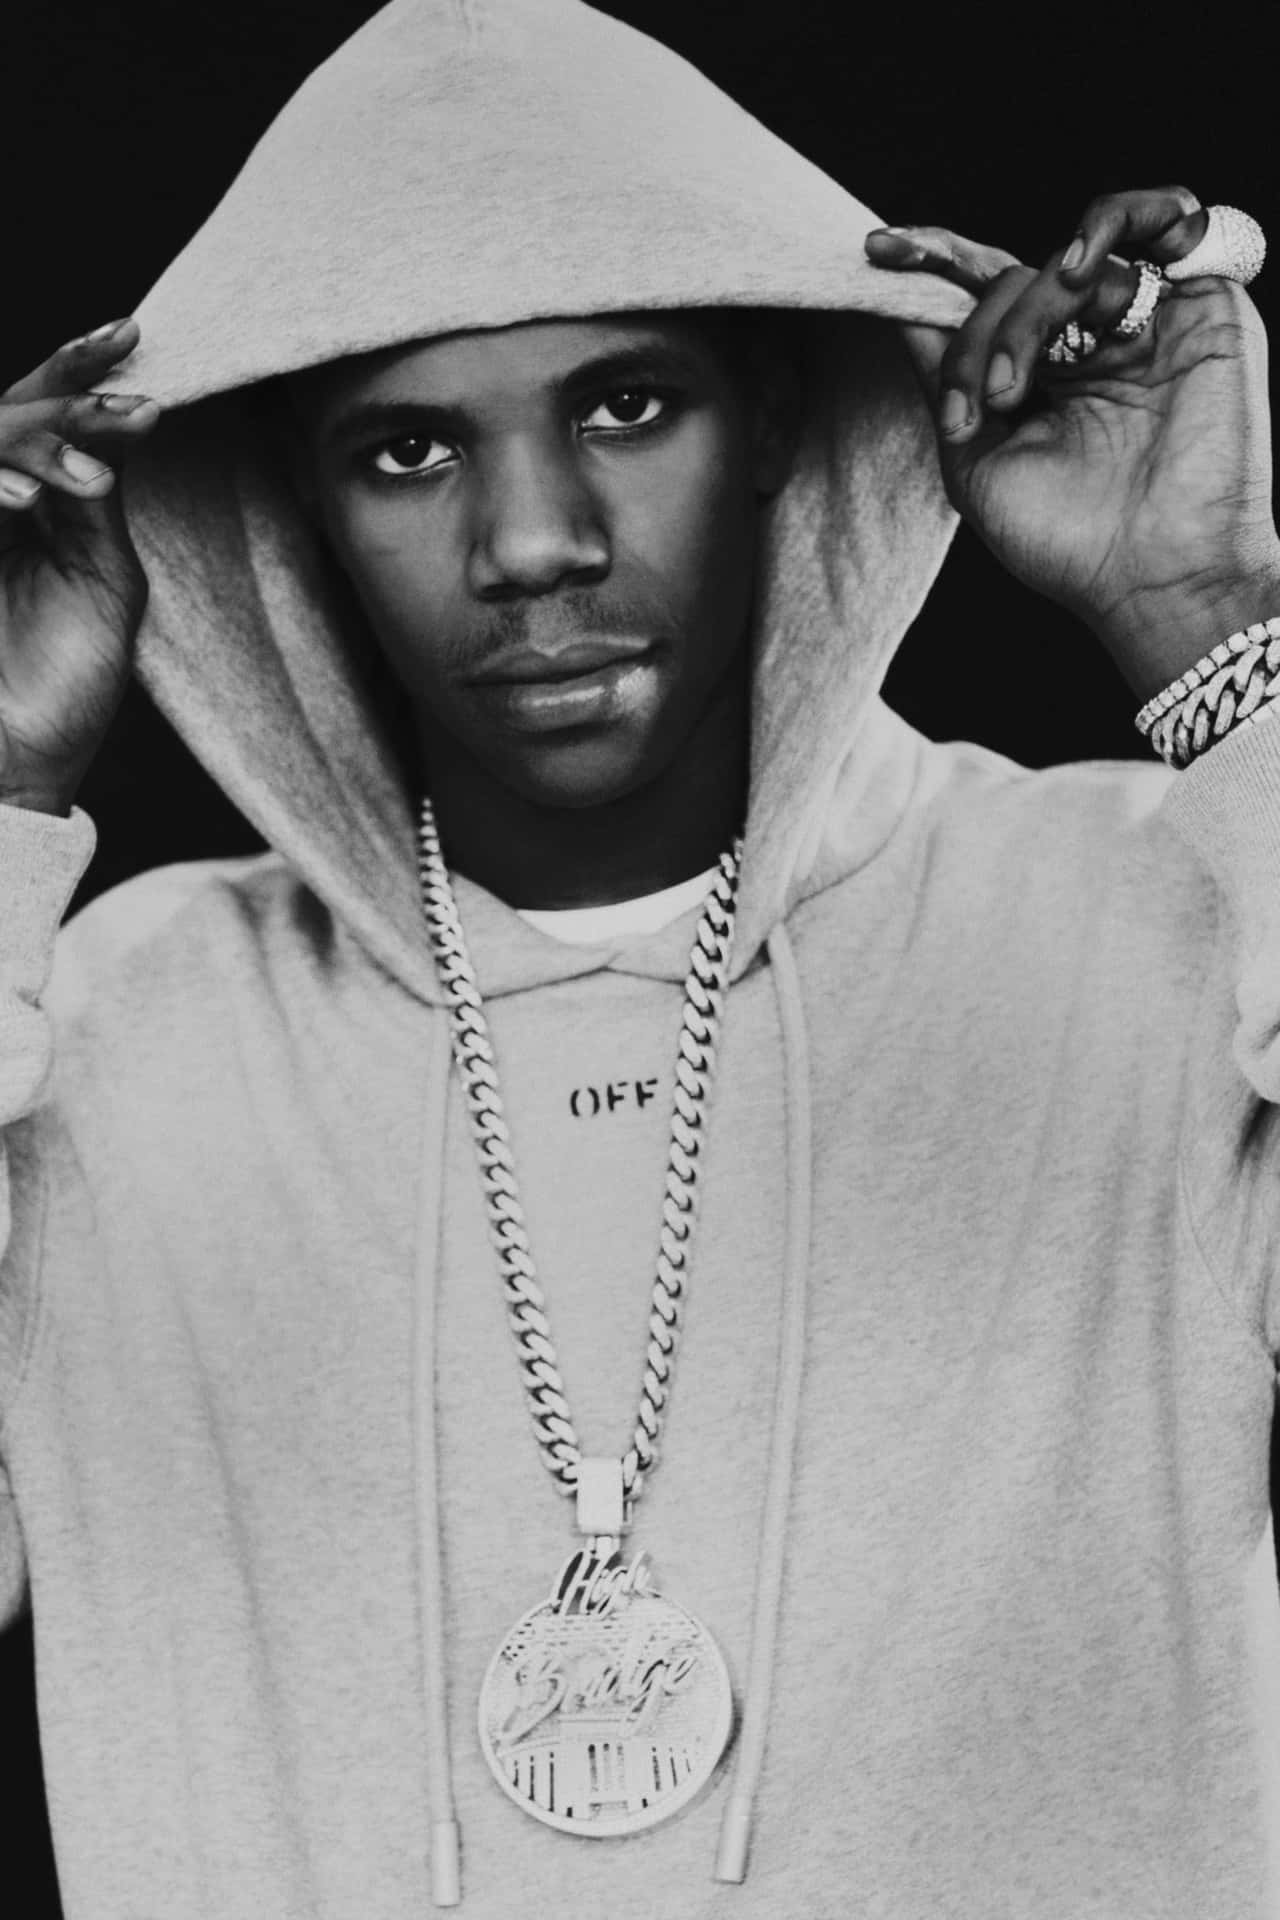 A Boogie Wallpaper Browse A Boogie Wallpaper with collections of A Boogie  Background Jungle Loc  Boogie wit da hoodie Hood wallpapers Rapper  wallpaper iphone